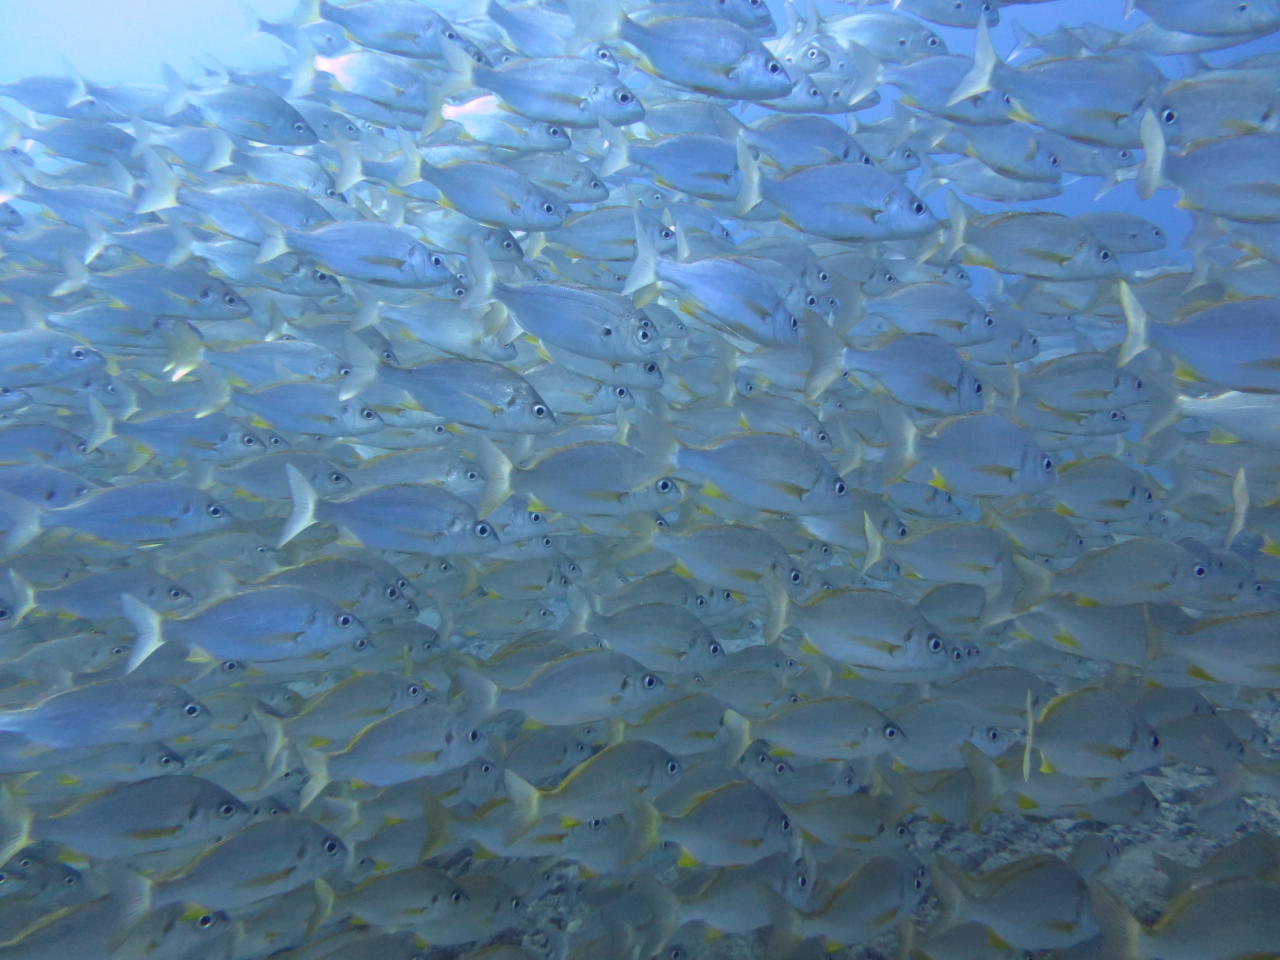 Yellow snappers